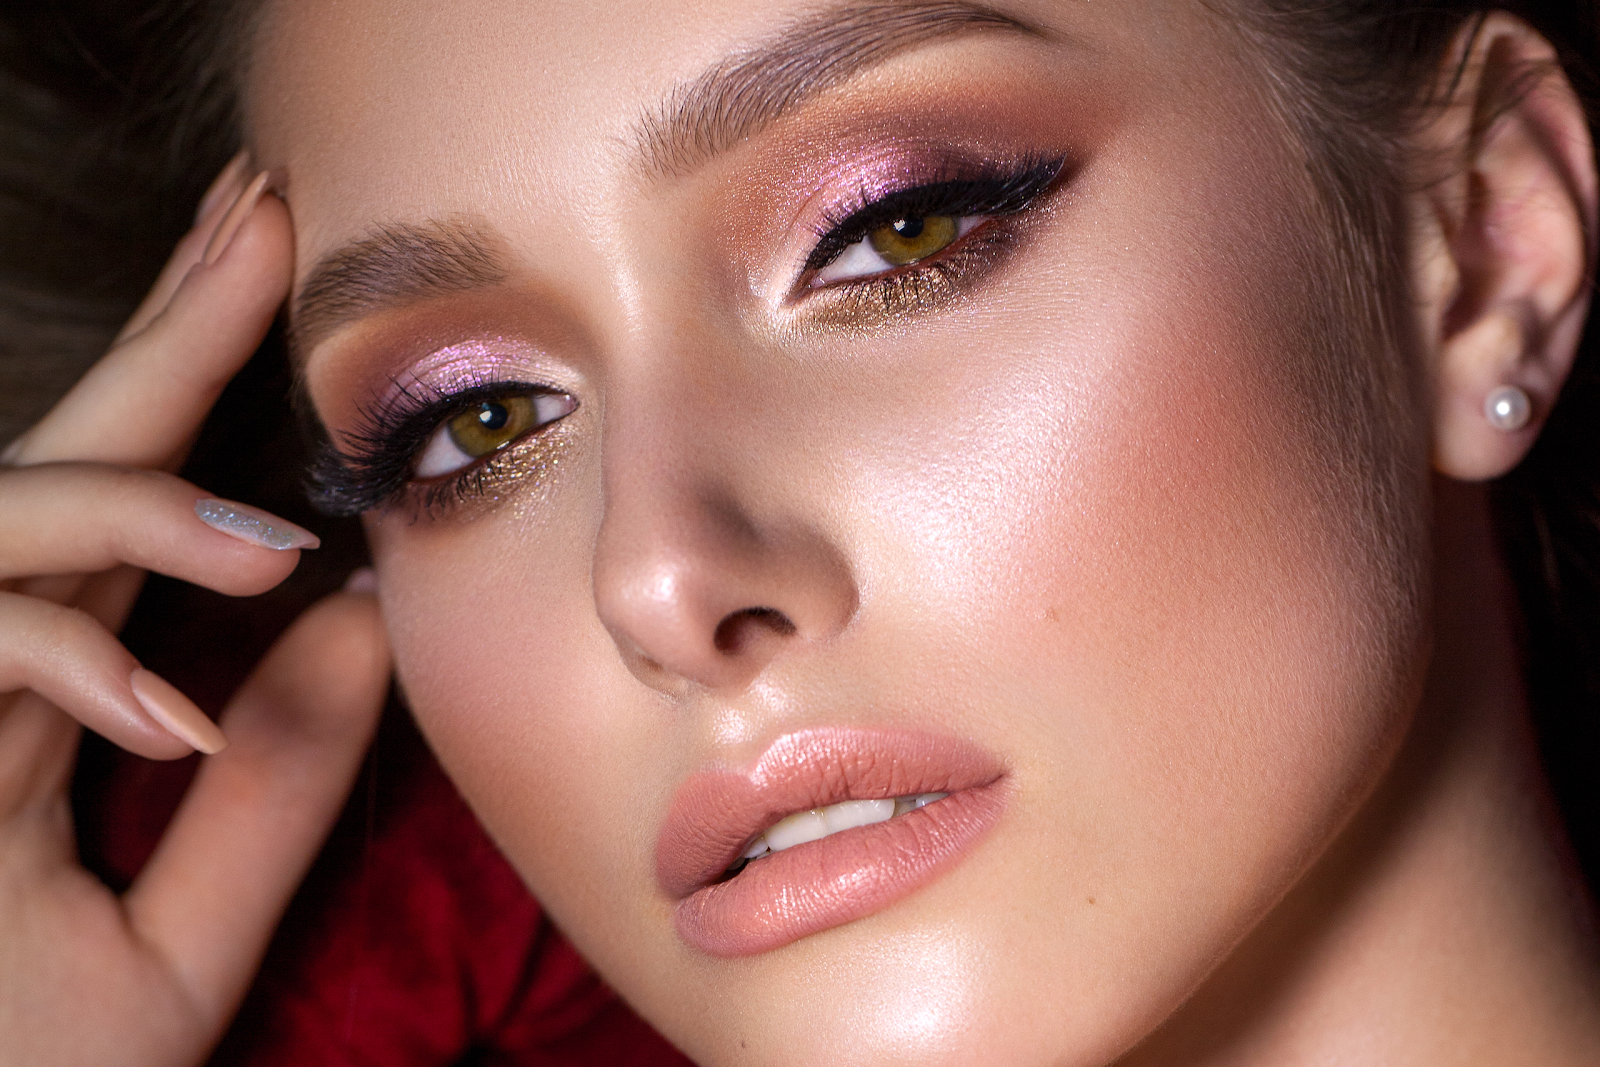 How To Wear Pink Eyeshadow? Here Are 13 Stunning Looks For You To Try